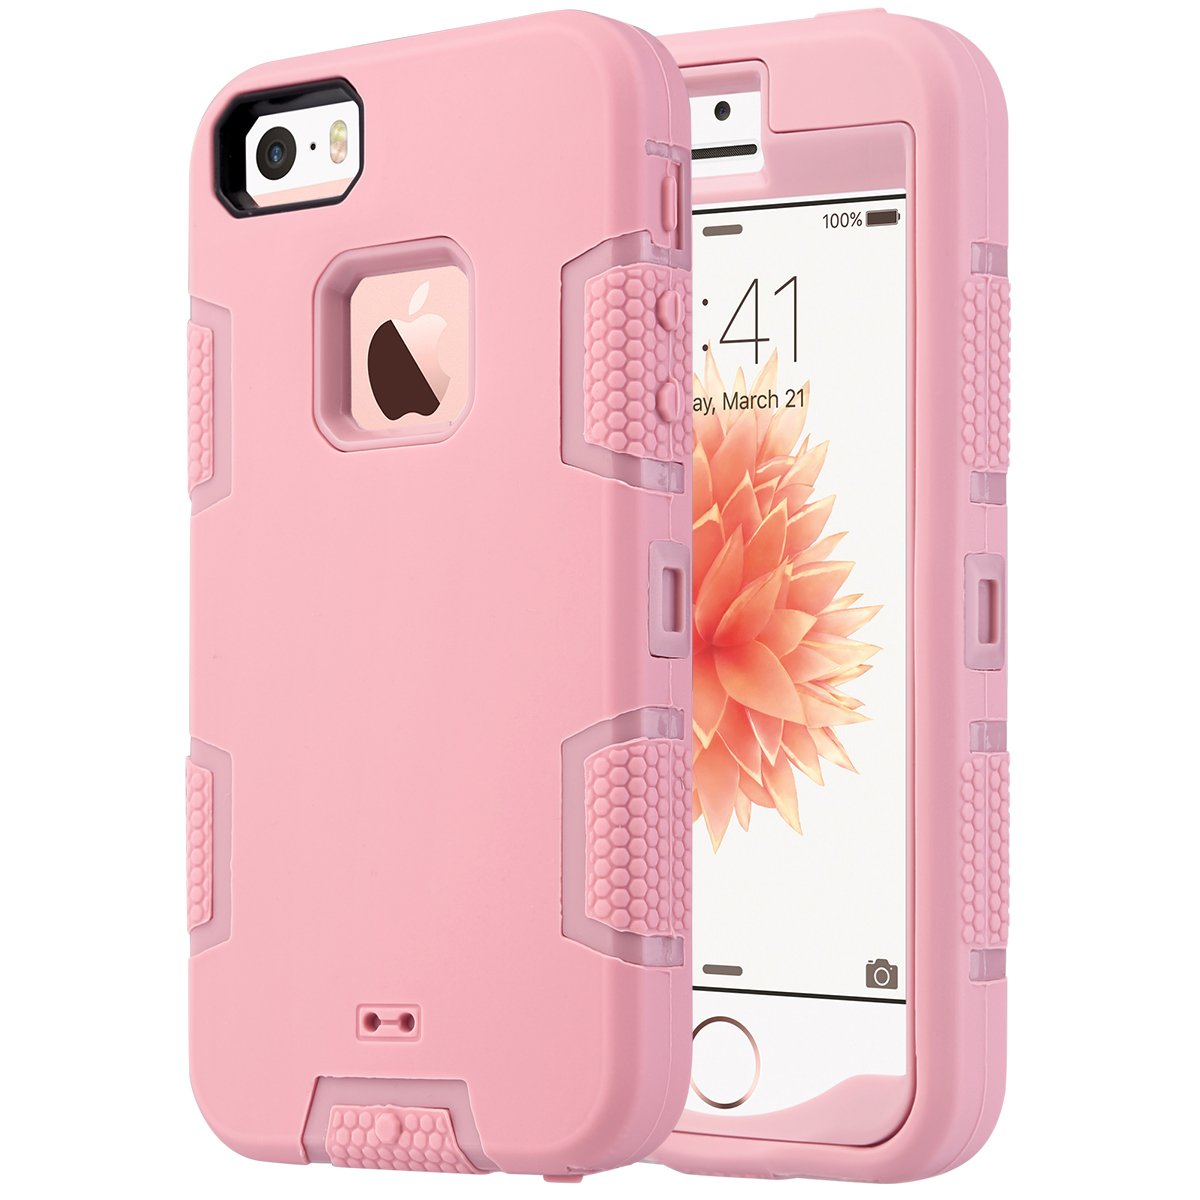 ULAK iPhone SE Case 2016,iPhone 5S 5 Case for Kids,Heavy Duty Shockproof Sport Rugged Phone Case for Apple iPhone 5 5S SE 1st Generation, not fit iPhone SE 2nd Gen 2020, Pink - image 1 of 7